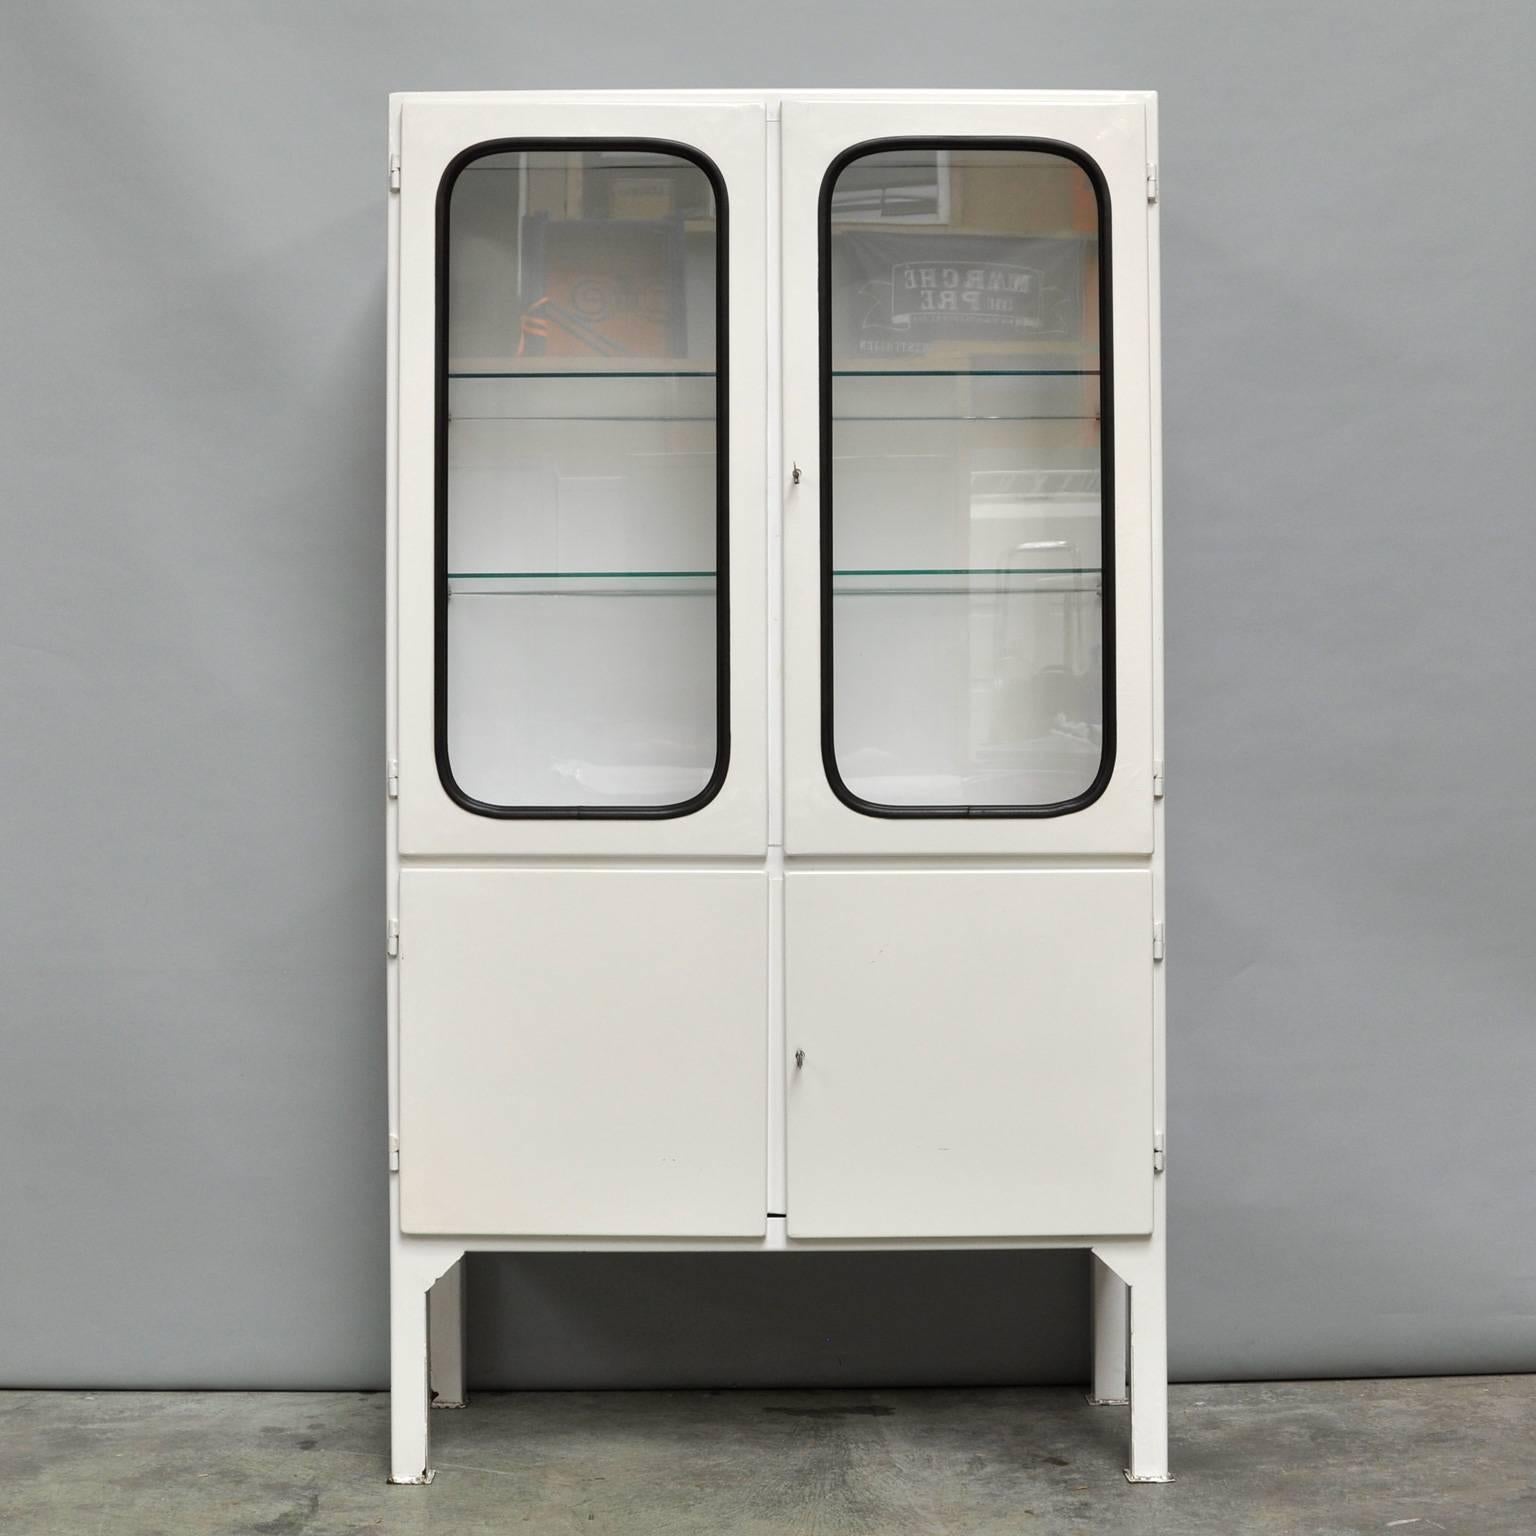 This medicine cabinet was designed in the 1960s and produced in the 1970s in Hungary. It is made from steel and glass and the glass is held by a black rubber strip. The cabinet comes with two adjustable glass shelves and functioning locks. It is in